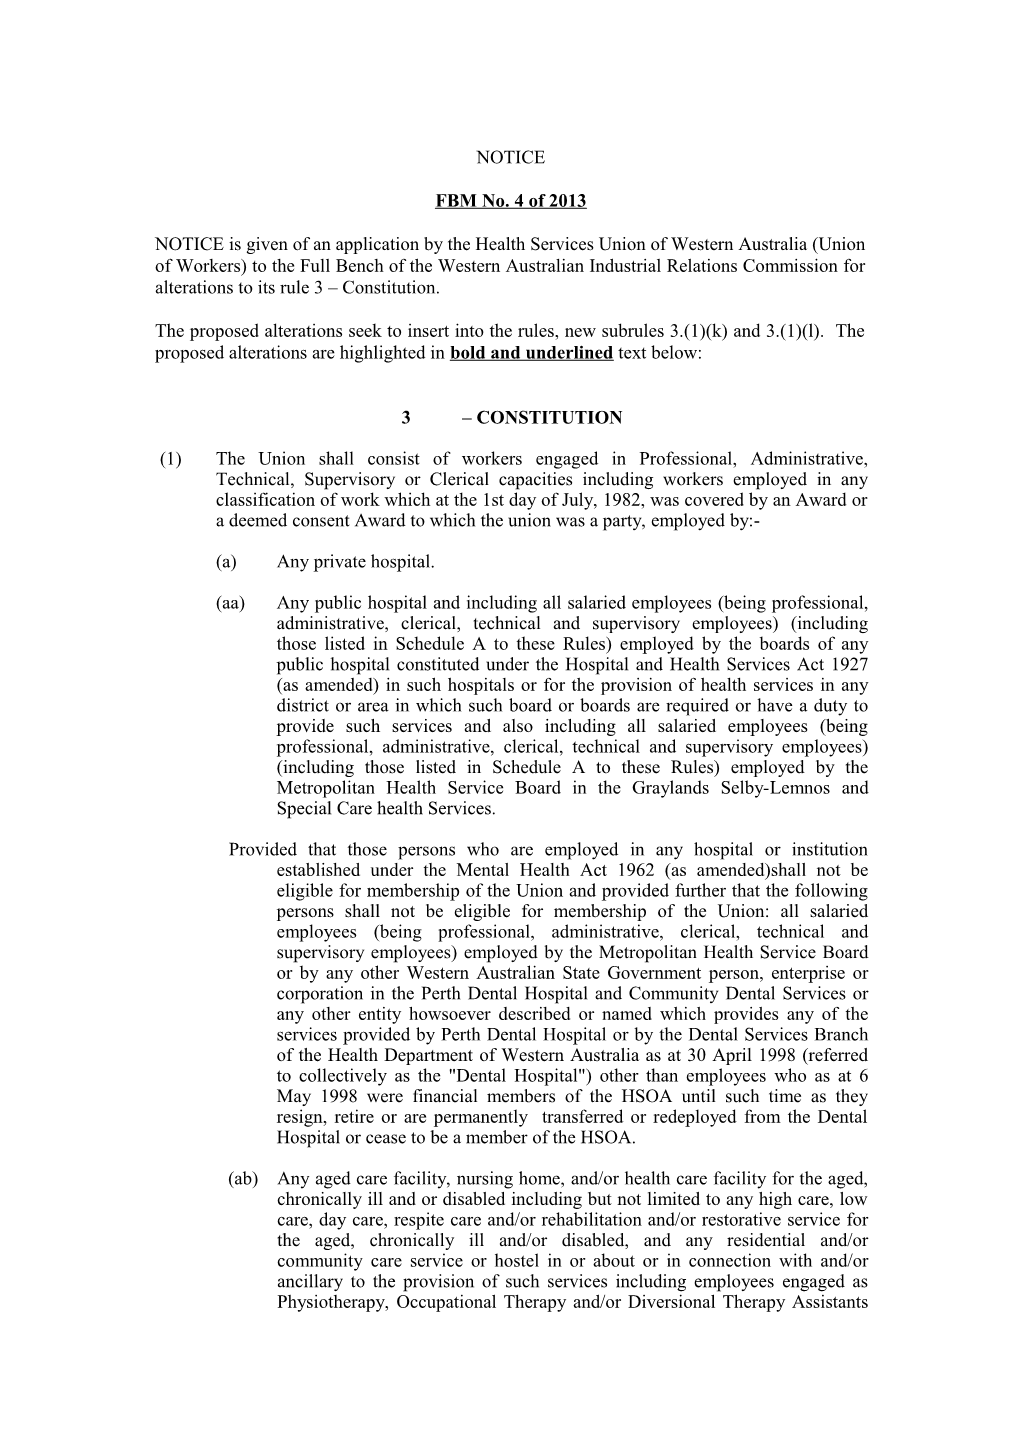 NOTICE Is Given of an Application by the Health Services Union of Western Australia (Union